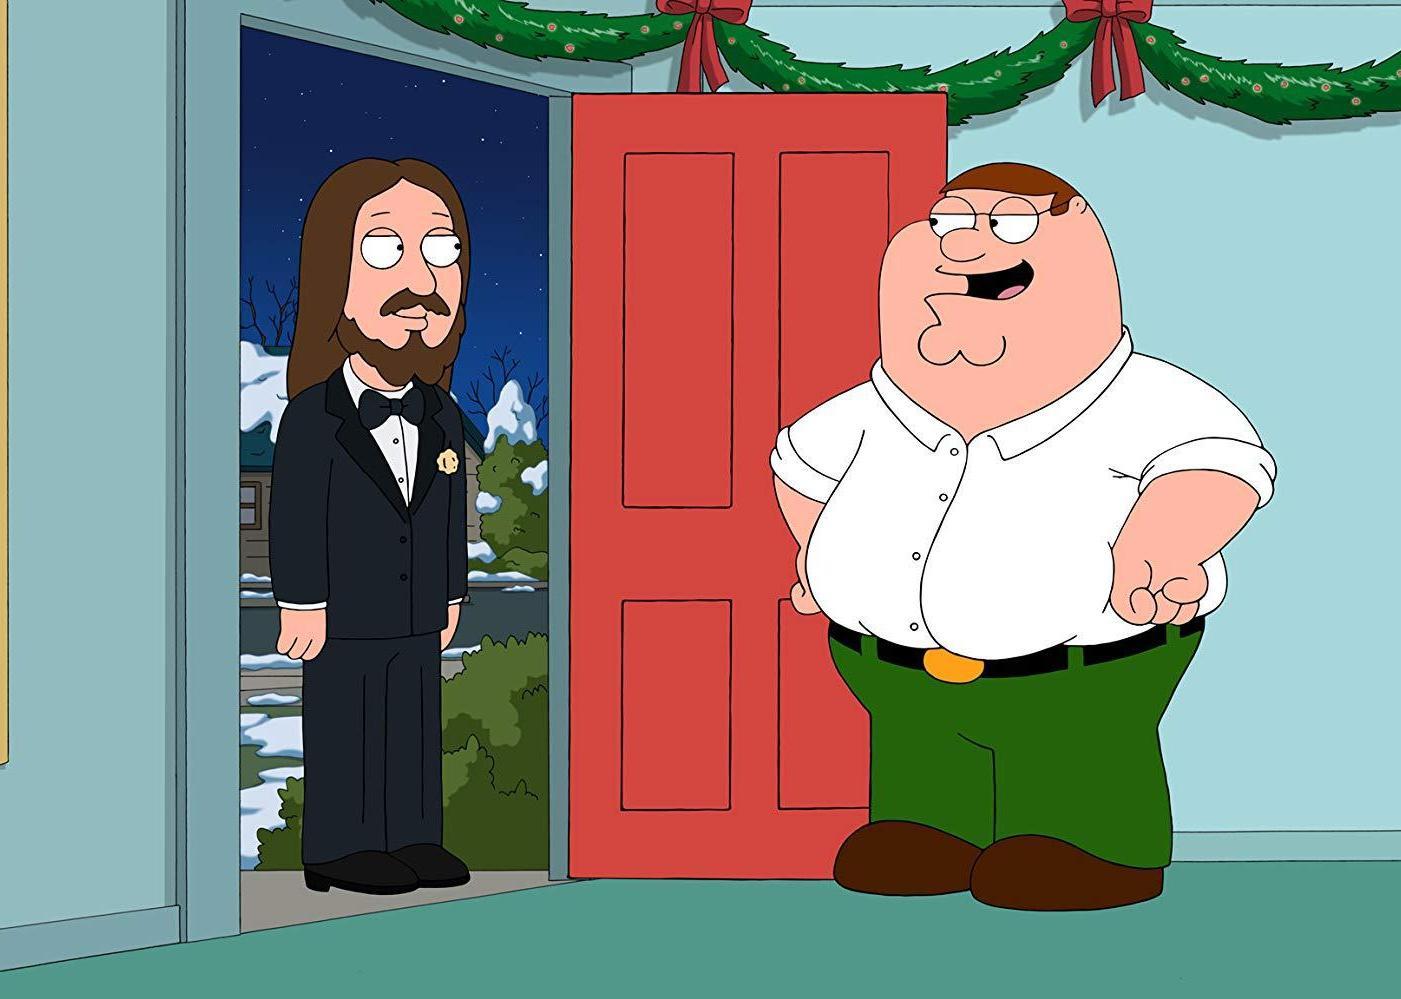 An animated still from ‘Family Guy’.